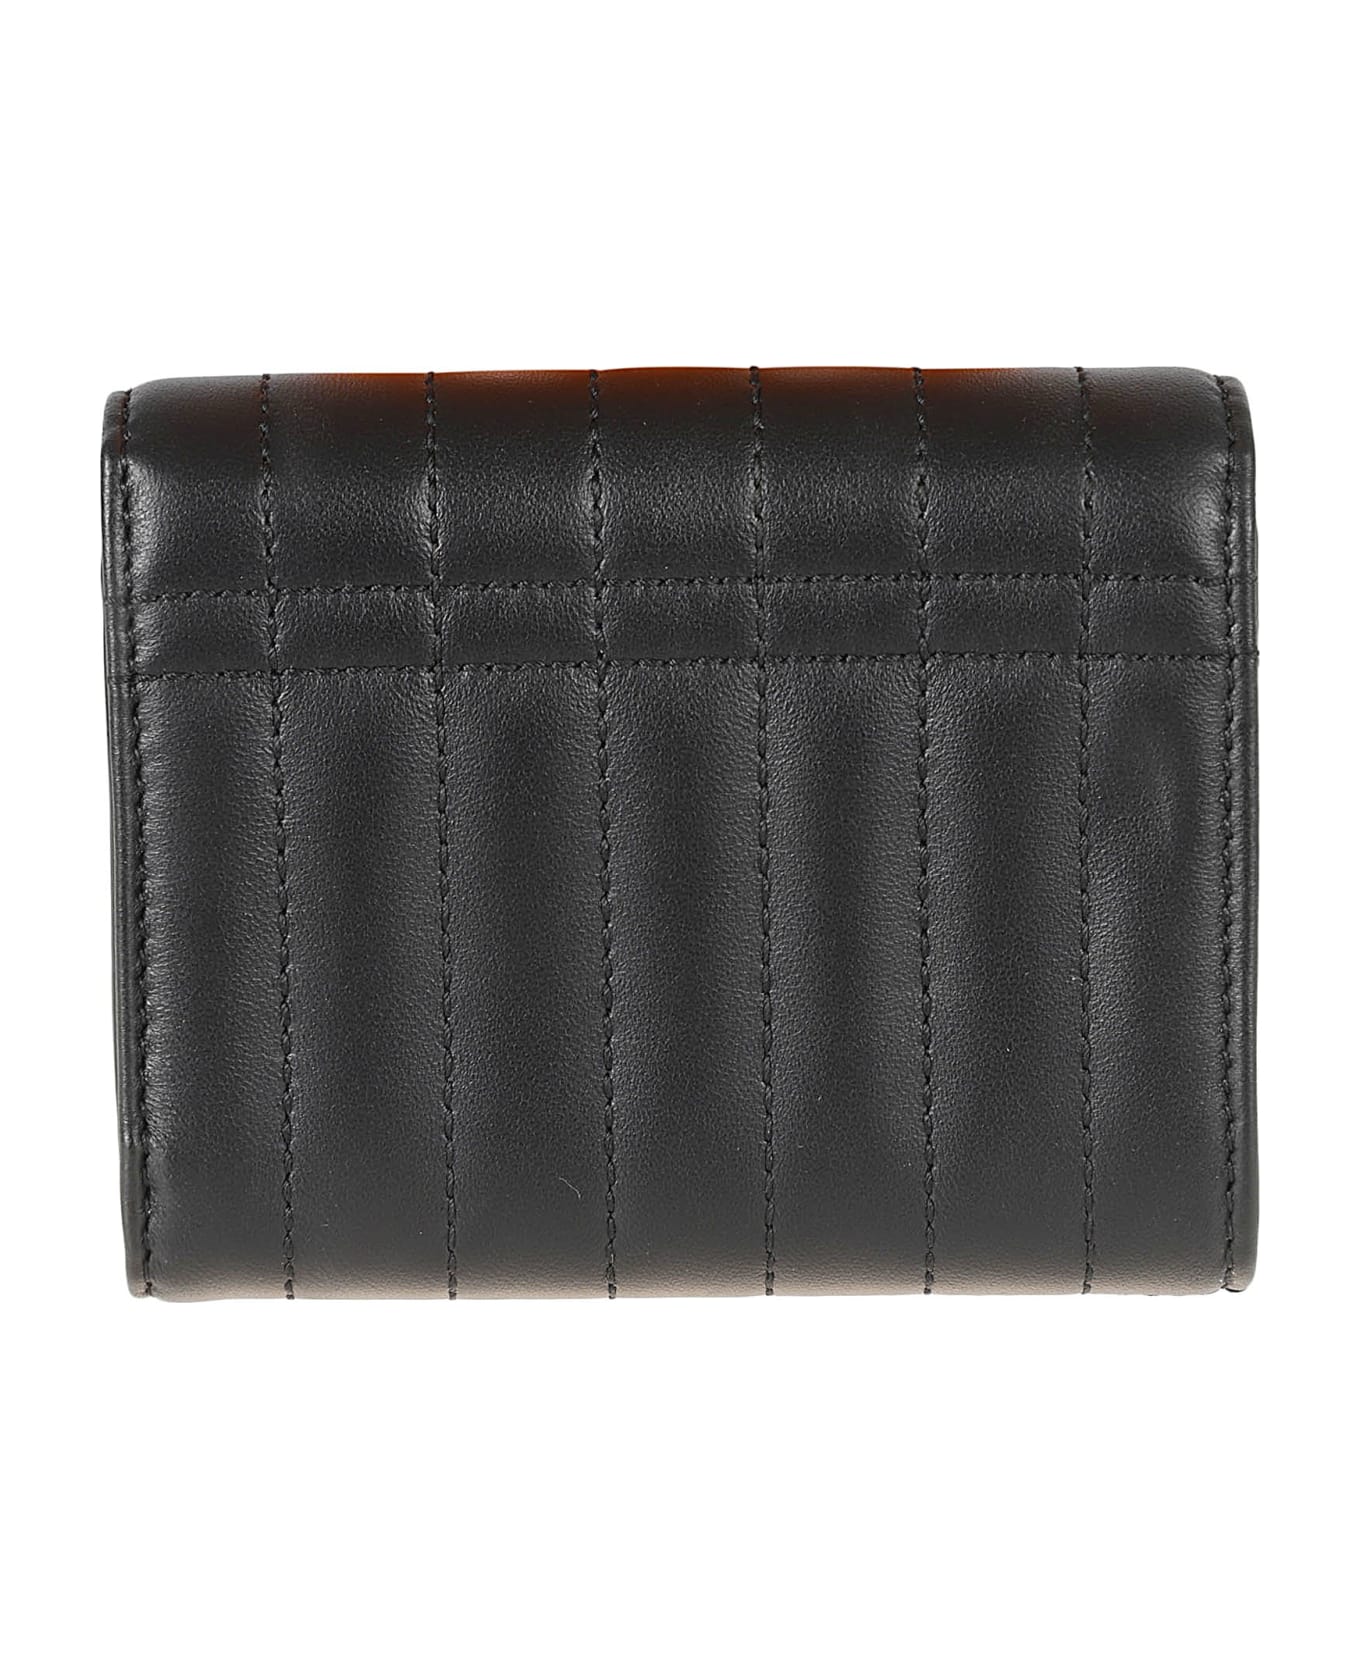 Burberry Tb Plaque Padded Snap Button Wallet - Black